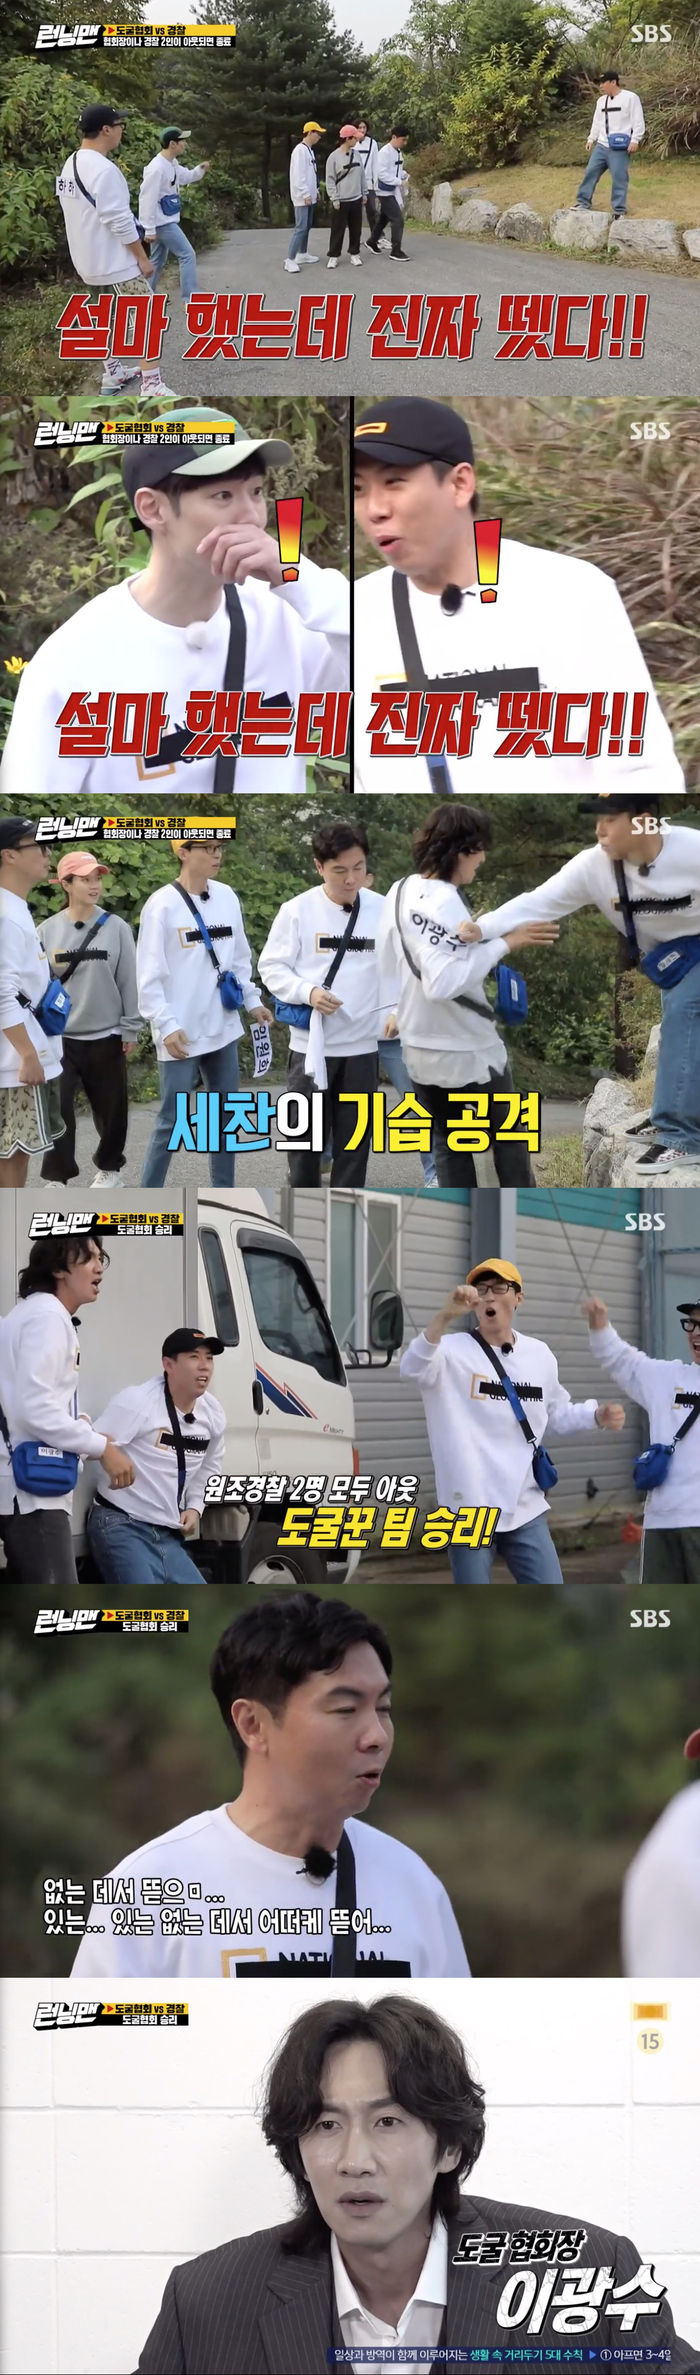 Im Won-hees great success (?) led to the Grave Robbery Association winning the victory.On SBS Running Man broadcasted on the 25th, Water vs. Man - Faceless Grave Robbery King Race was held.On the day of the broadcast, the members were divided into two teams, the Grave Robbery Association and Police.Name tag Race, which ends when the president and two Polices are in-N-Out Burger.And there was only one betrayal opportunity for a regular Grave robbery; so some turned to Police and some kept their righteousness.And the aid Police, who had been trying to catch the president of the association since the beginning of Race, were Lee Je-hoon and Yang Se-chan.Also Im Won-hee was a turnaround Police who betrayed him.Yoo Jae-Suk, who sought Police with many hints, narrowed down the Police candidate by sharing hints with Yoo Jae-Suk.Yoo Jae-Suk predicted that Jeon So-min would be 100% apostolic Police.And their forecasts were right: Kim Jong-kook had in-N-Out Burger for the apostate Police Jeon So-min.Also, Kim Jong-kook suspected Lee Kwang-soo, who created fake hints and confused them.In response, he joined forces with Song Ji-hyo to rip off Lee Kwang-soos name tag; however, Lee Kwang-soo was not Police.Kim Jong-kook was then in-N-Out Burger.On one side, aid police plotted with Im Won-hee how to get Grave robberymen to In-N-Out Burger.Yang Se-chan ordered everyone will doubt us, but my brother does not know anyone, so my brother ordered Ji Hyo sister to In-N-Out Burger.So Im Won-hee took off the name tag of Song Ji-hyo at the scene where the rest of the Grave robbery and Police gathered, and Song Ji-hyo was In-N-Out Burger and Im Won-hee was revealed to be Police.Then, in a flash, the scene became a mess, with Lee Kwang-soo and Yoo Jae-Suk targeting Lee Je-hoon and Yang Se-chan respectively.And they took the namesake of the two and ended the race with a victory by the Grave robbery man, in-N-Out Burger of both the original Police.Yang Se-chan, who was in-N-Out Burger, said, Won Hee-hyung, I said something, I told him to tear my sister off without anyone.Im Won-hee said, How do you open it when there is no one? I screwed up? I do not know the rules.The president of the association was Lee Kwang-soo, who was out of the doubt of many people because he deliberately made cheap goods and had no money.Lee Kwang-soo shared the winning prize with Song Ji-hyo, and Ji Suk-jin was selected as the last penalty among the Police teams and was hit by the water.